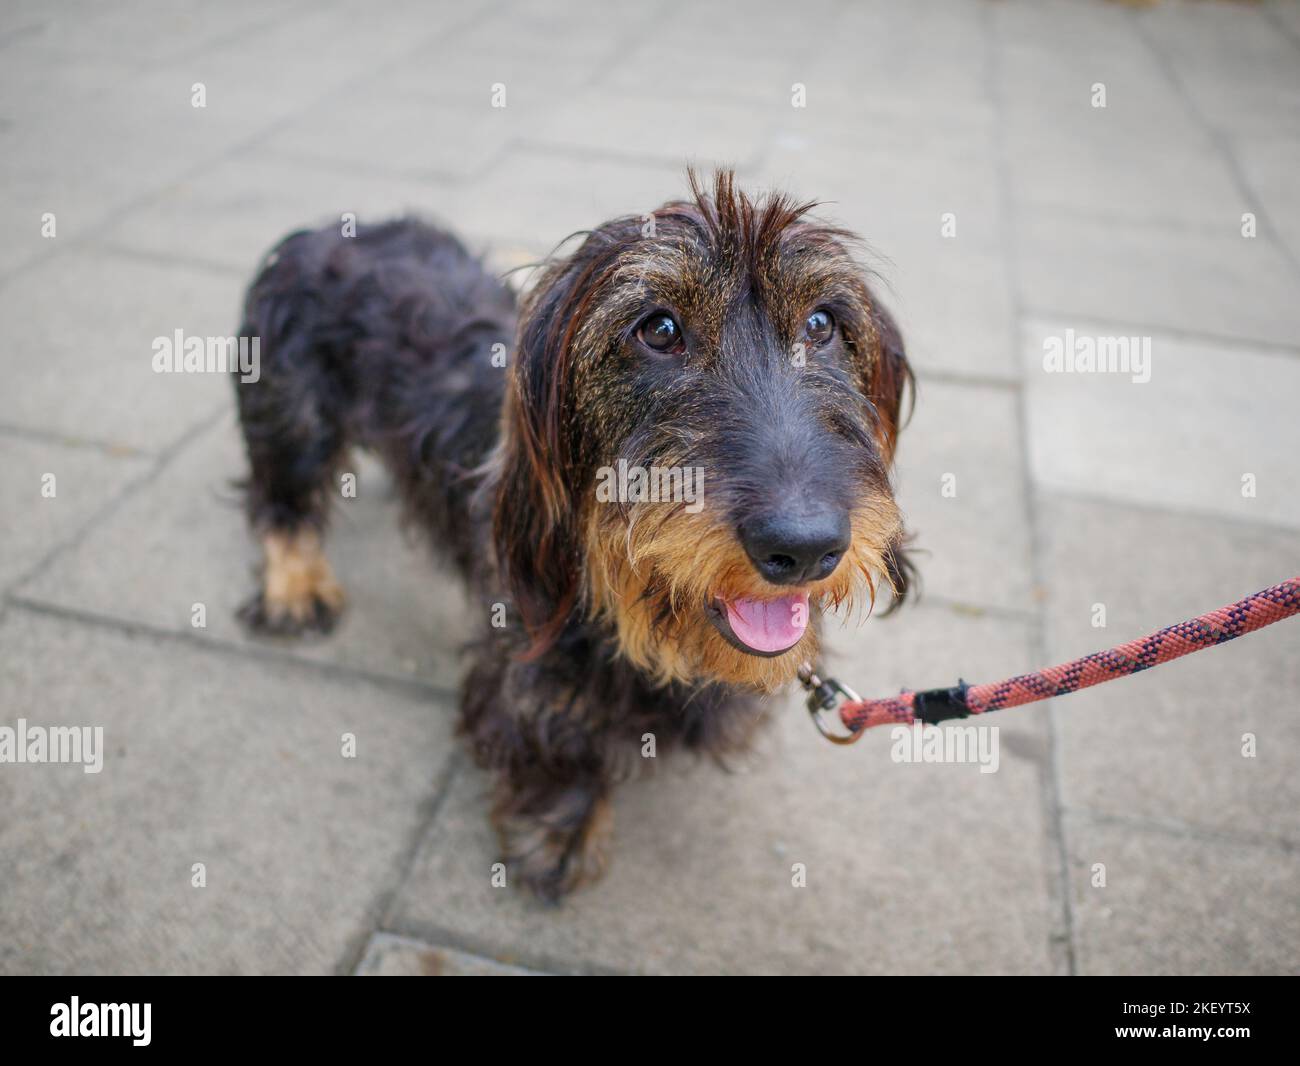 Portrait of a standard wire haired daschund dog on a lead outside in the street Stock Photo